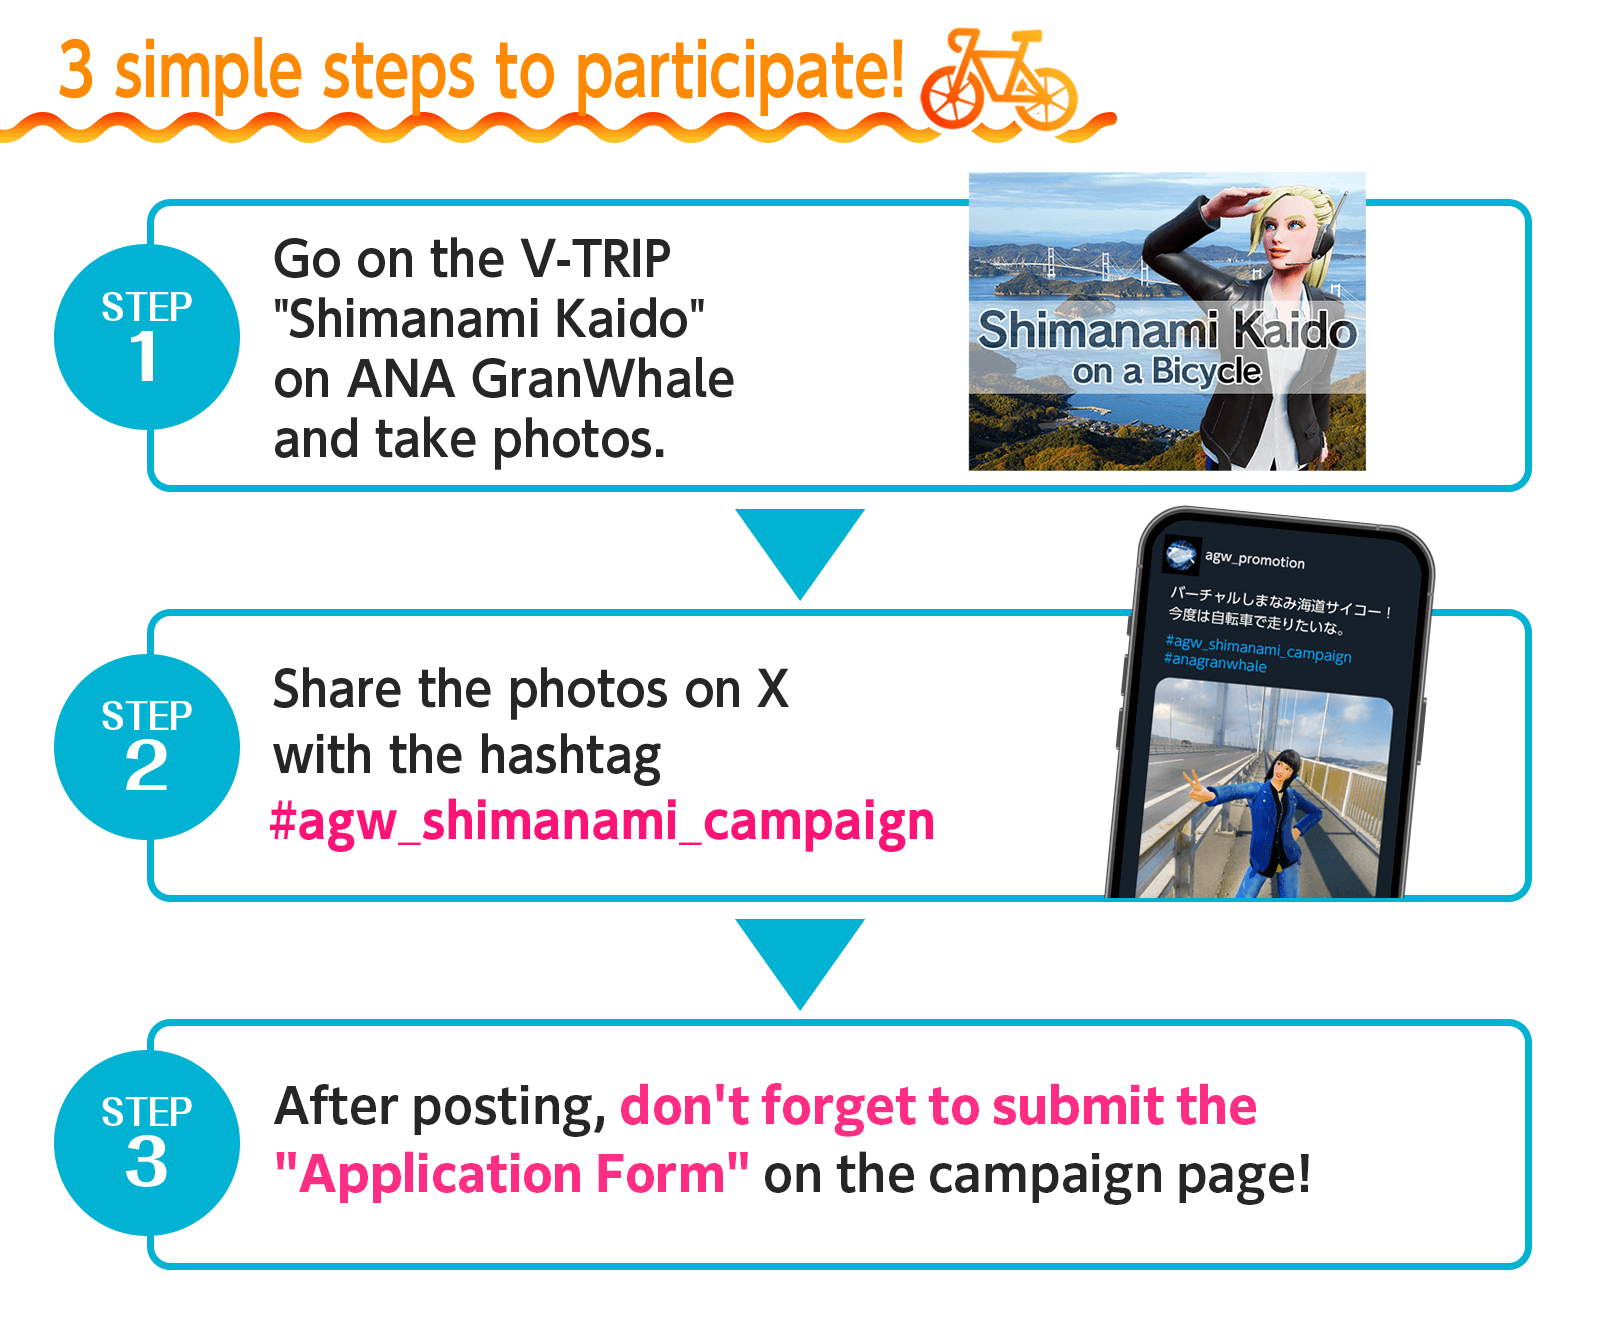 Join the X Posting Campaign in ANA GranWhale, to win Luxurious Prizes by Embarking on the Virtual Trip to Ehime Prefecture’s Shimanami Kaido (Sea Route)!